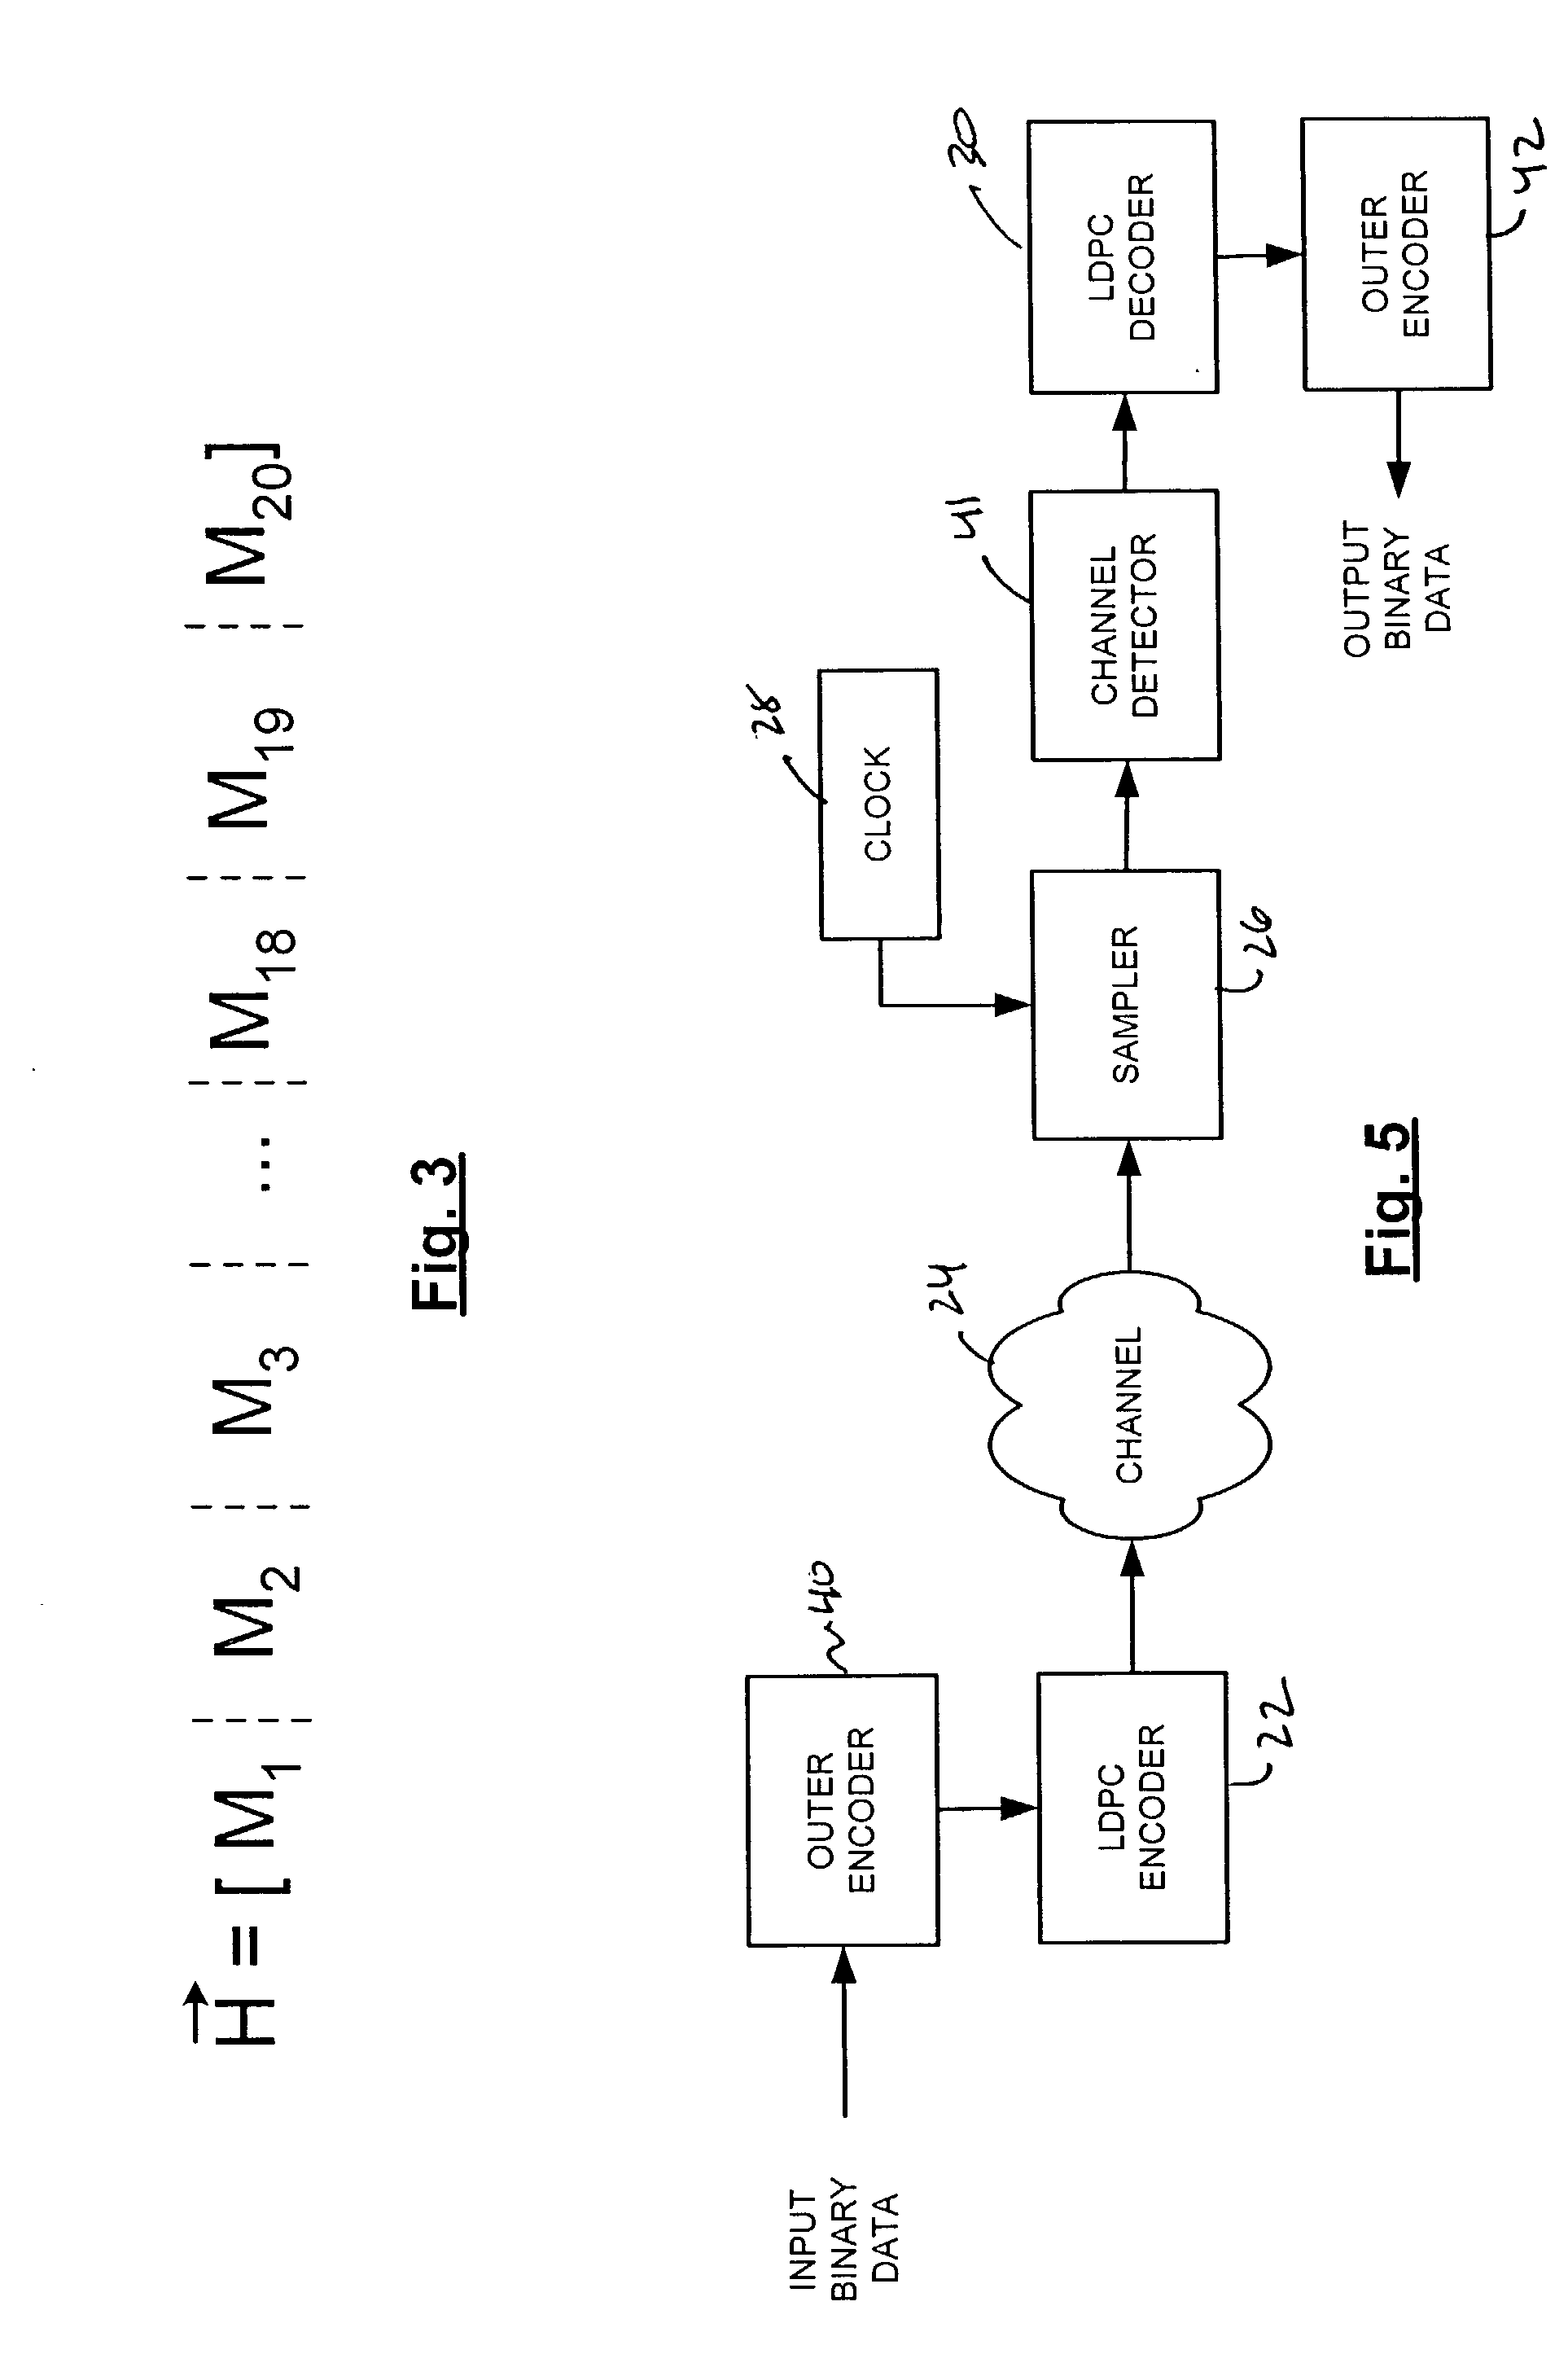 Encoding method using a low density parity check code with a column weight of two